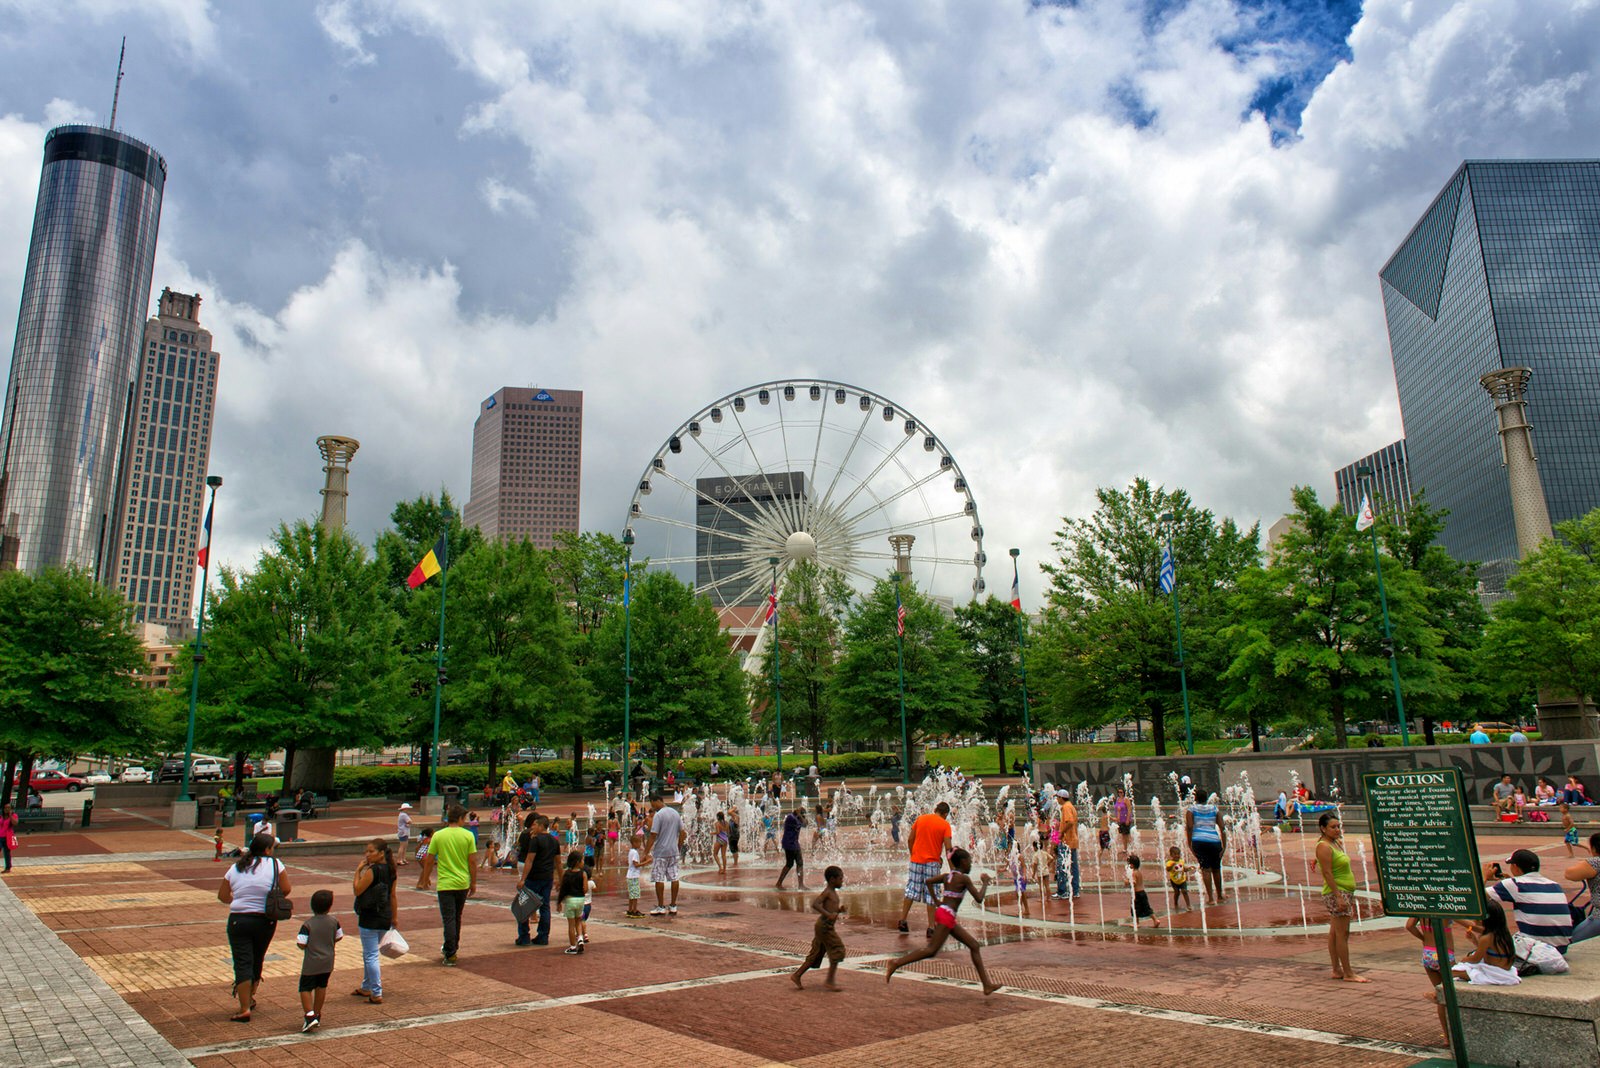 Atlanta is always on the move and is becoming more pedestrian-friendly © Gene Phillips / AtlantaPhotos.com